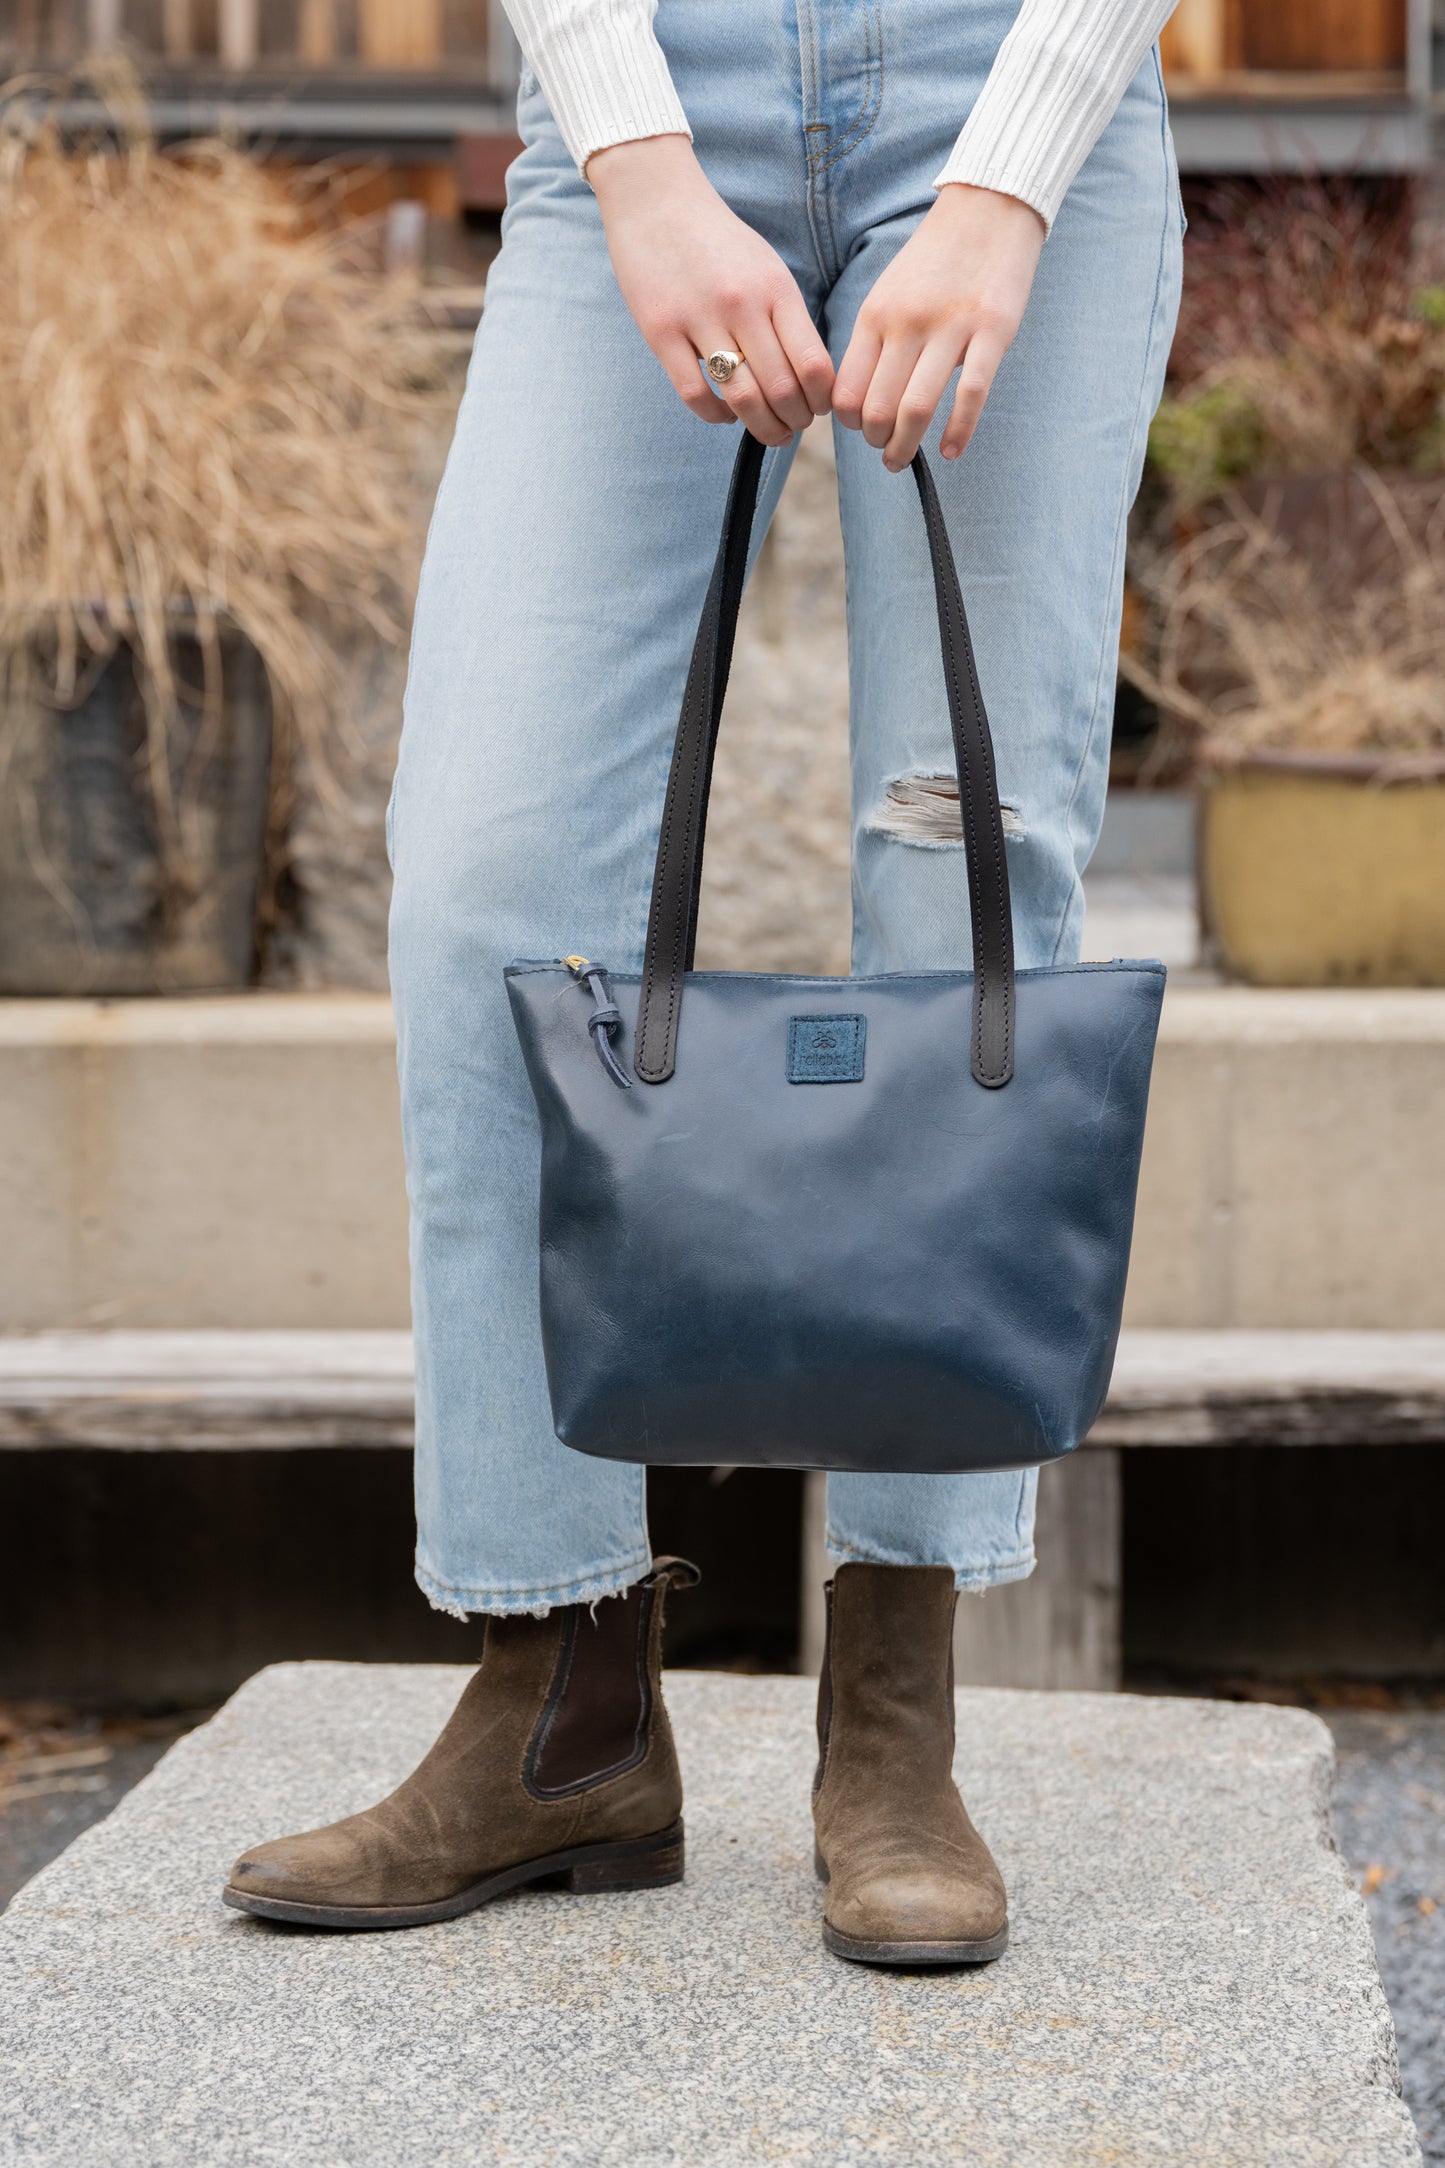 The Little Tote: Speckled Paint and Indigo Blue Hide